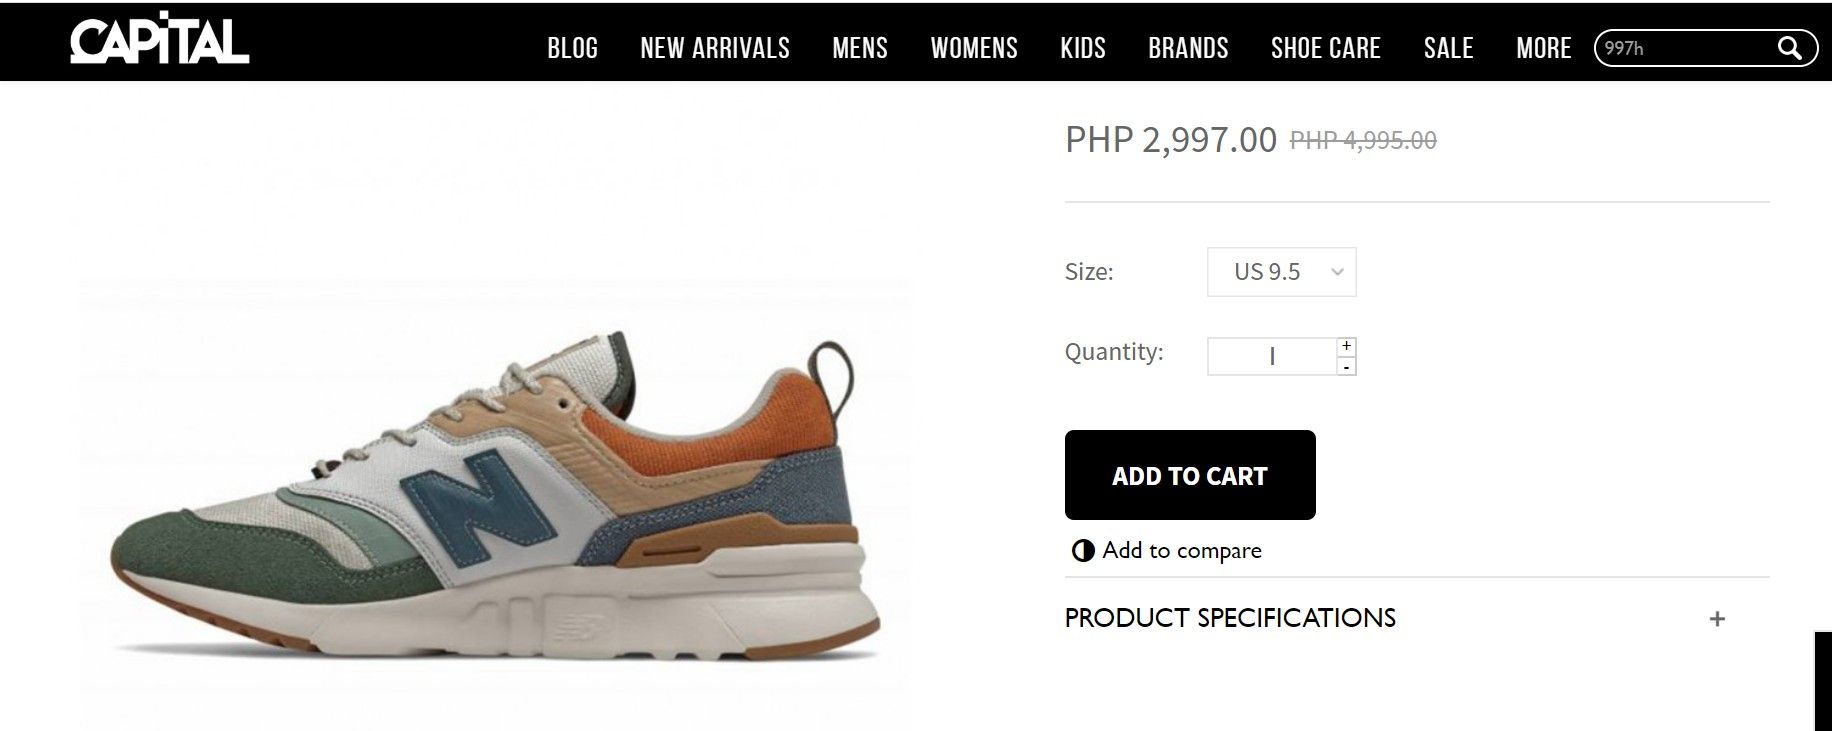 Sneakers at Capital PH now at 25 percent off, New Balance at 40 percent off